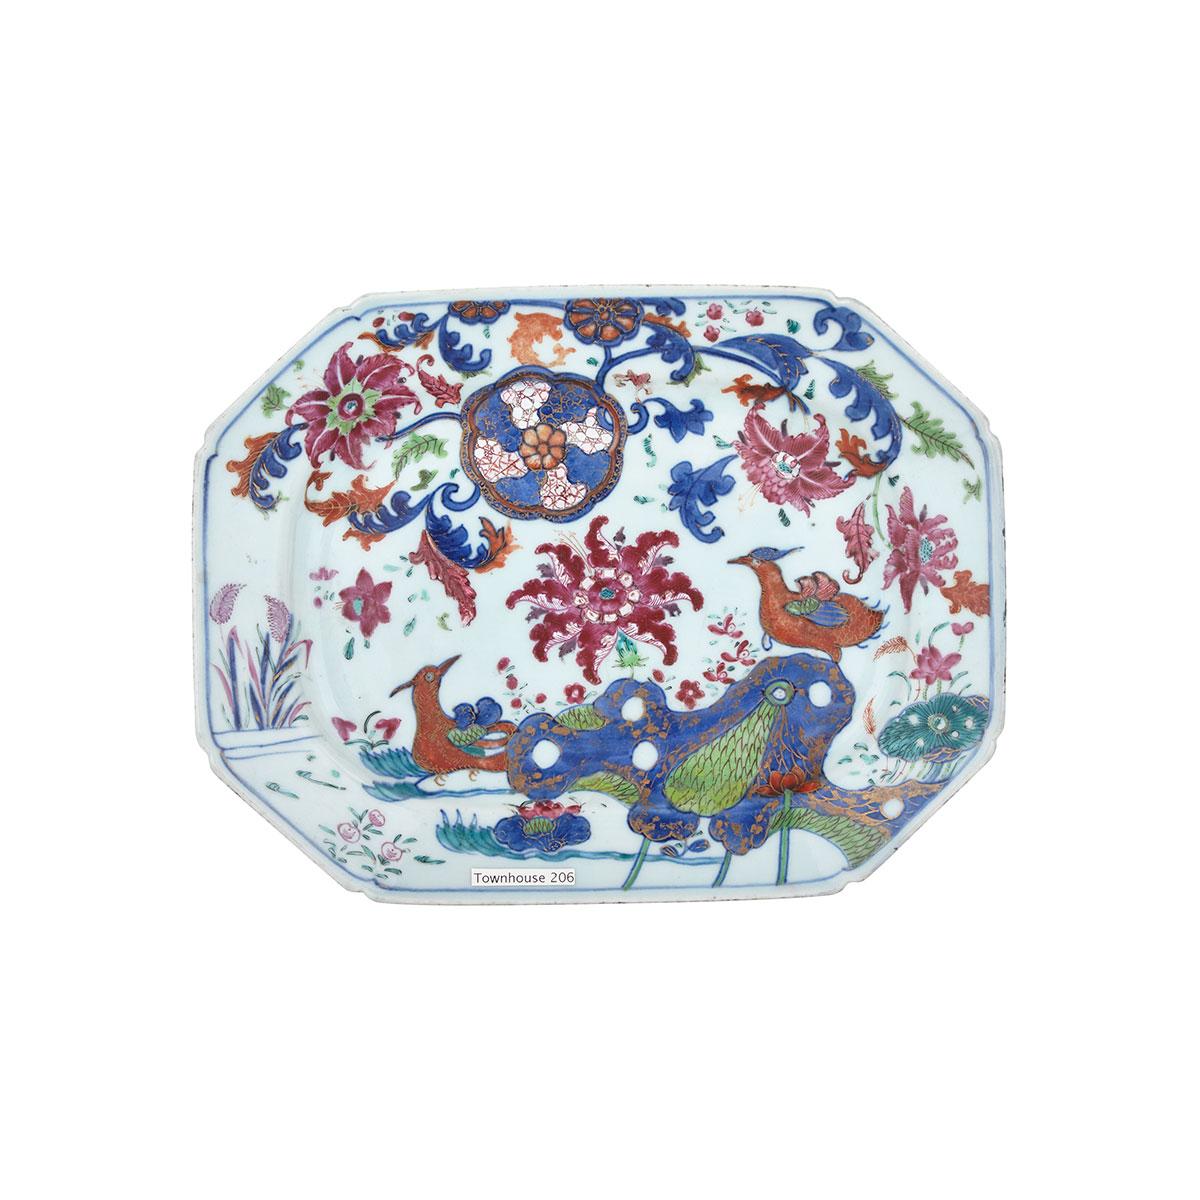 Export Famille Rose ‘Tobacco Leaf’ Octagonal Tray, 18th/19th Century